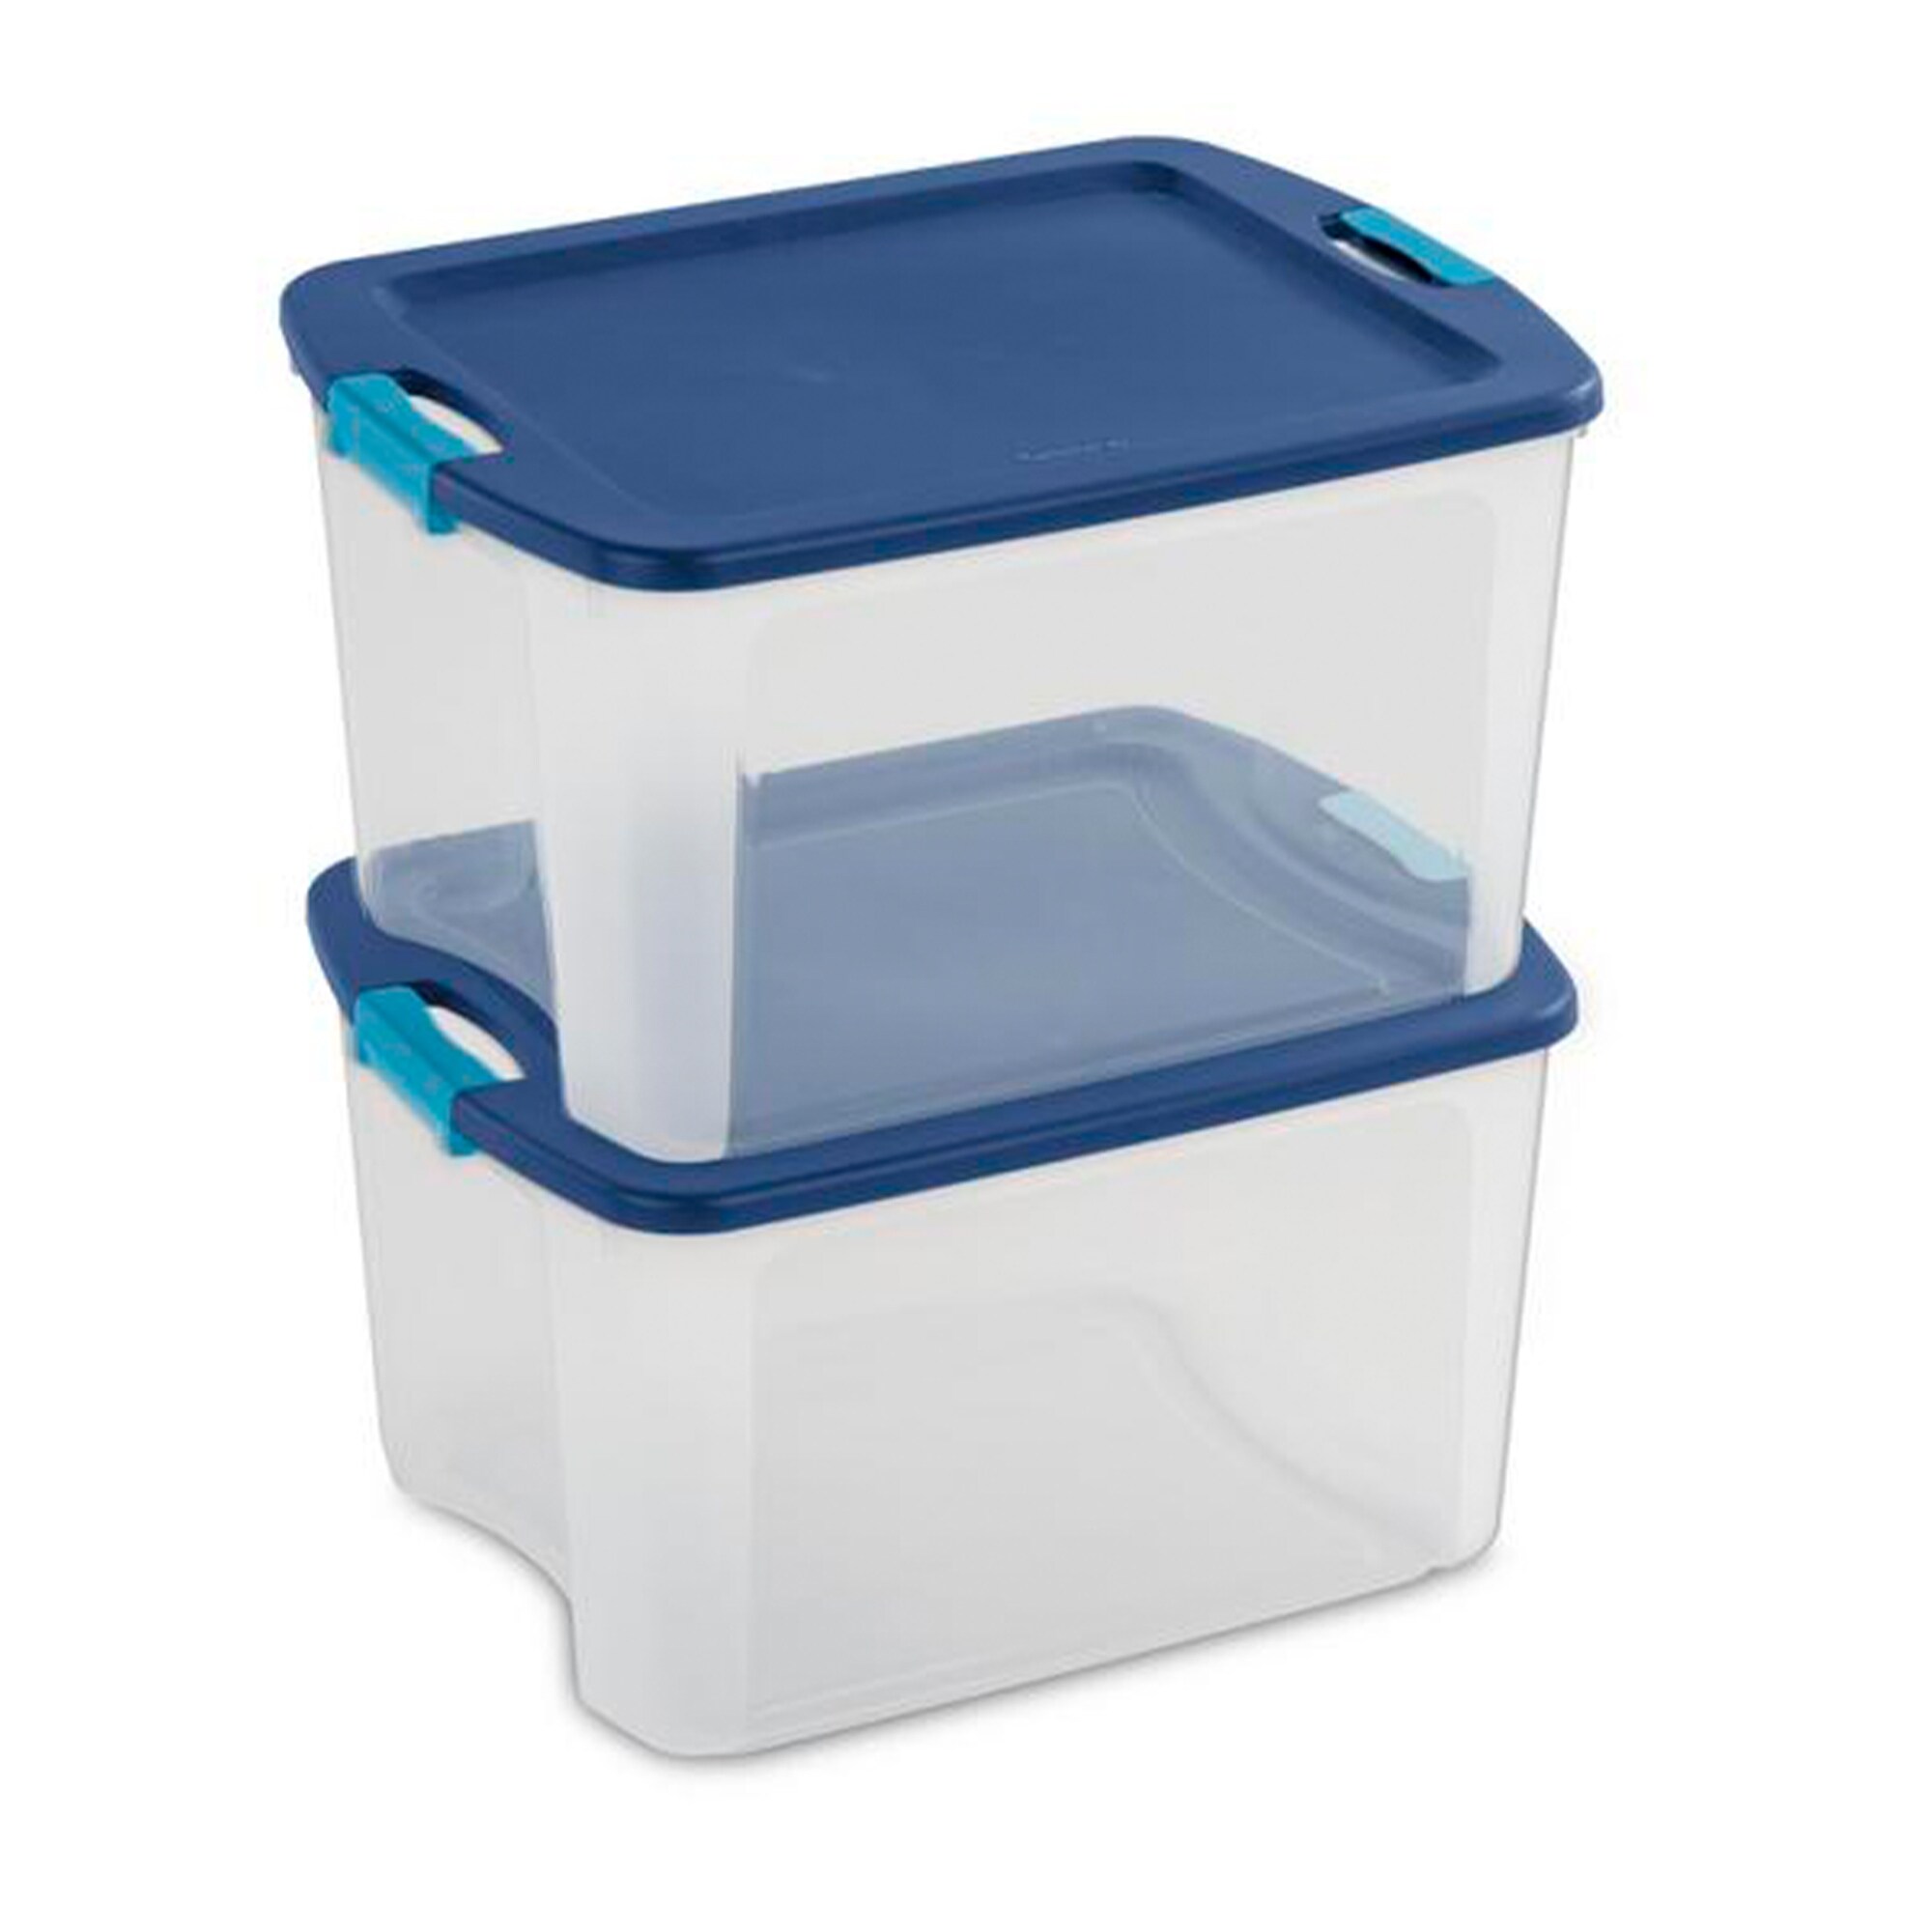 Sterilite 56 Quart Latching Stackable Wheeled Storage Container w/ Lid (4 Pack)